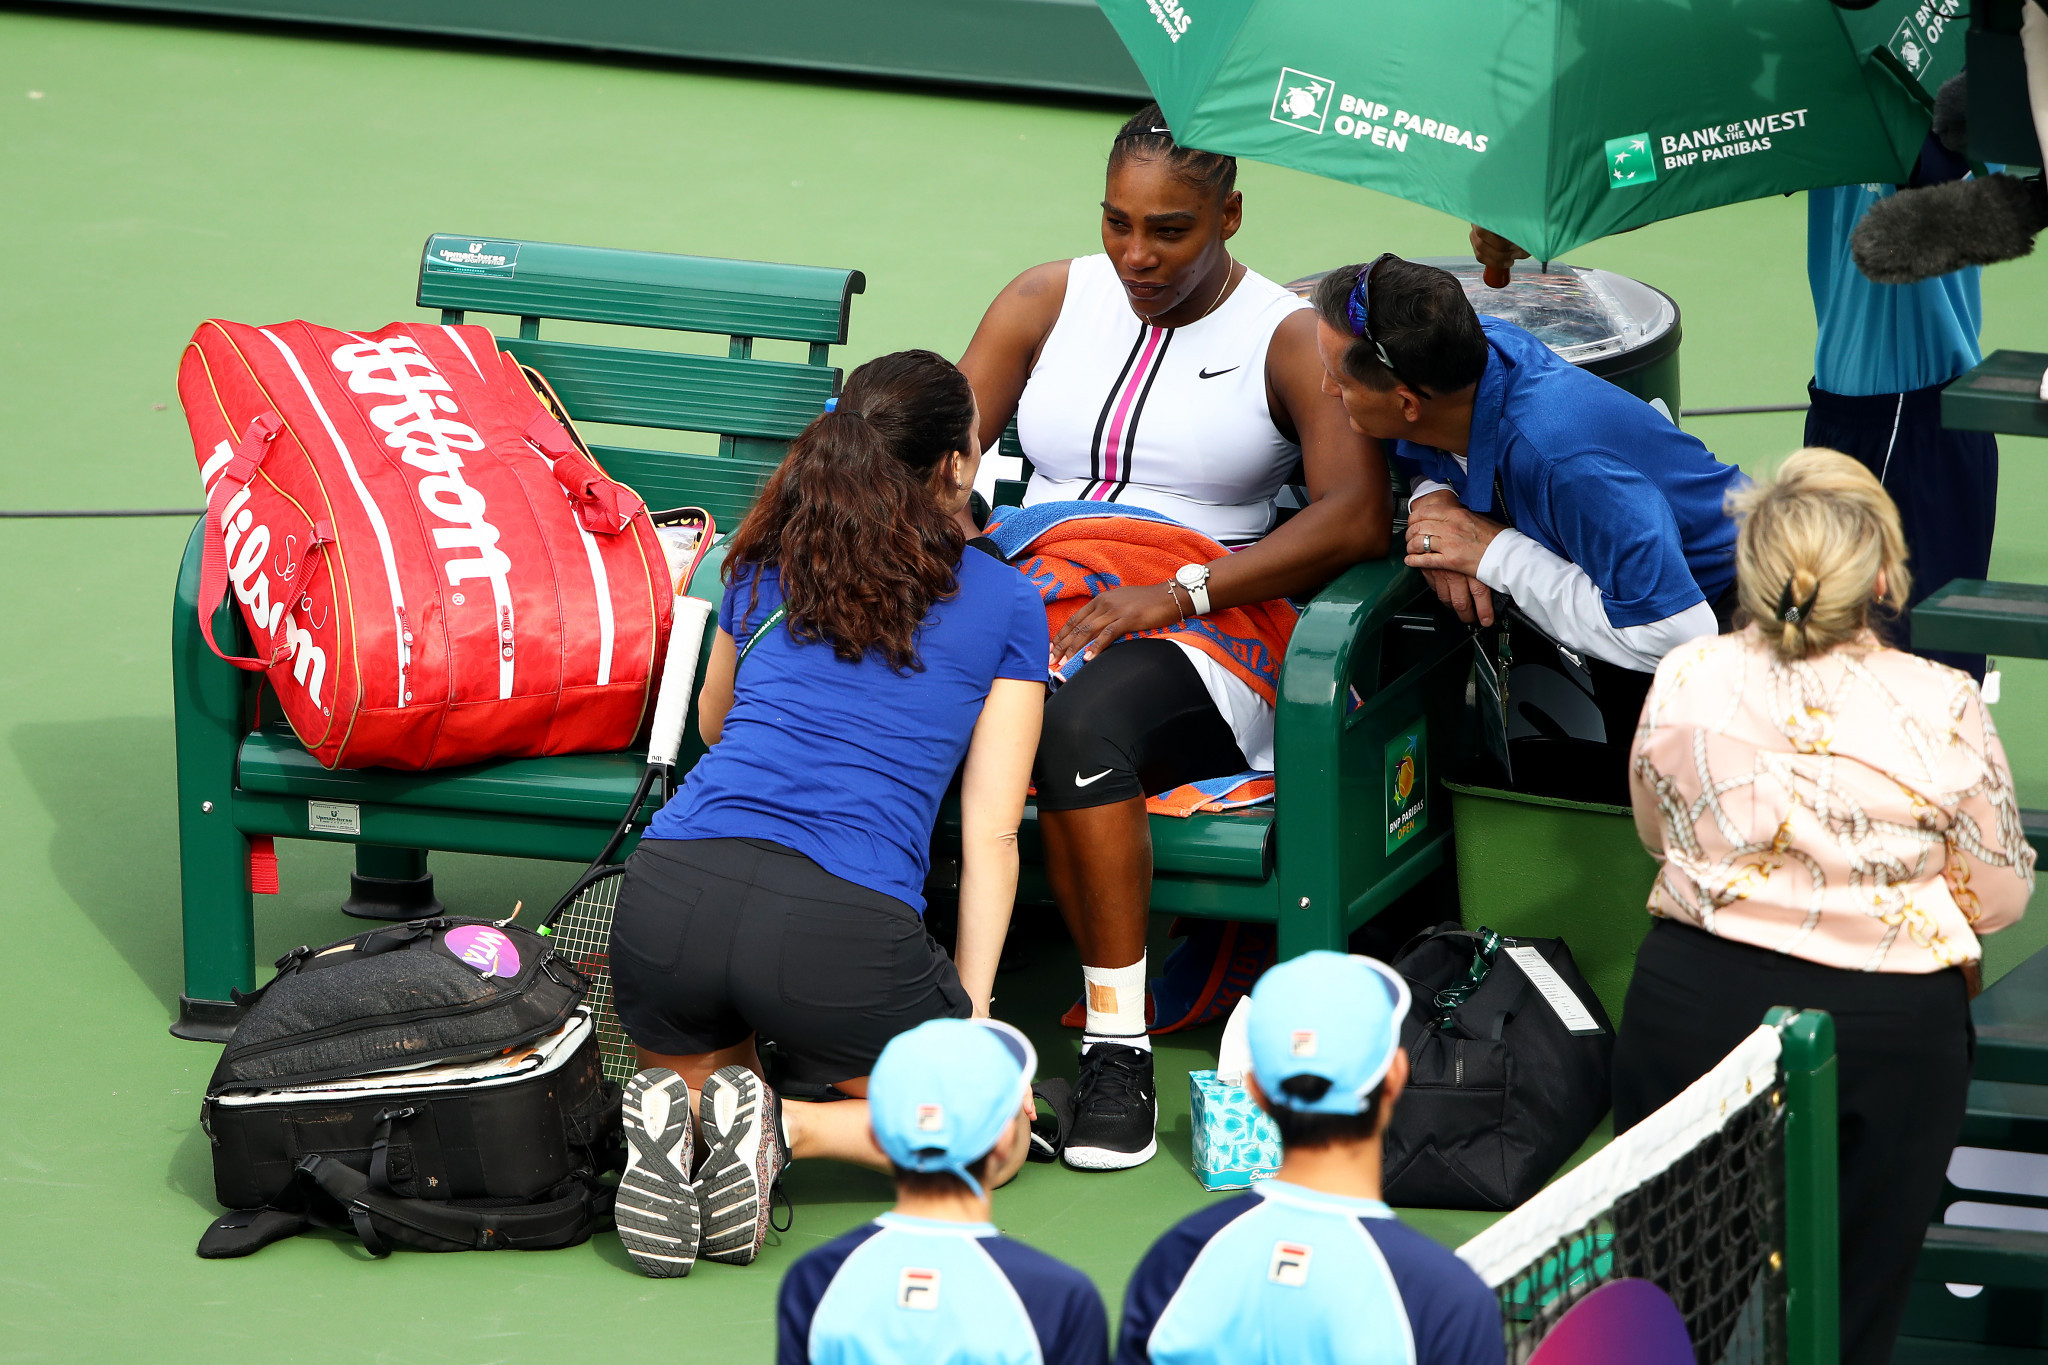 Williams forced to retire through illness at Indian Wells Masters